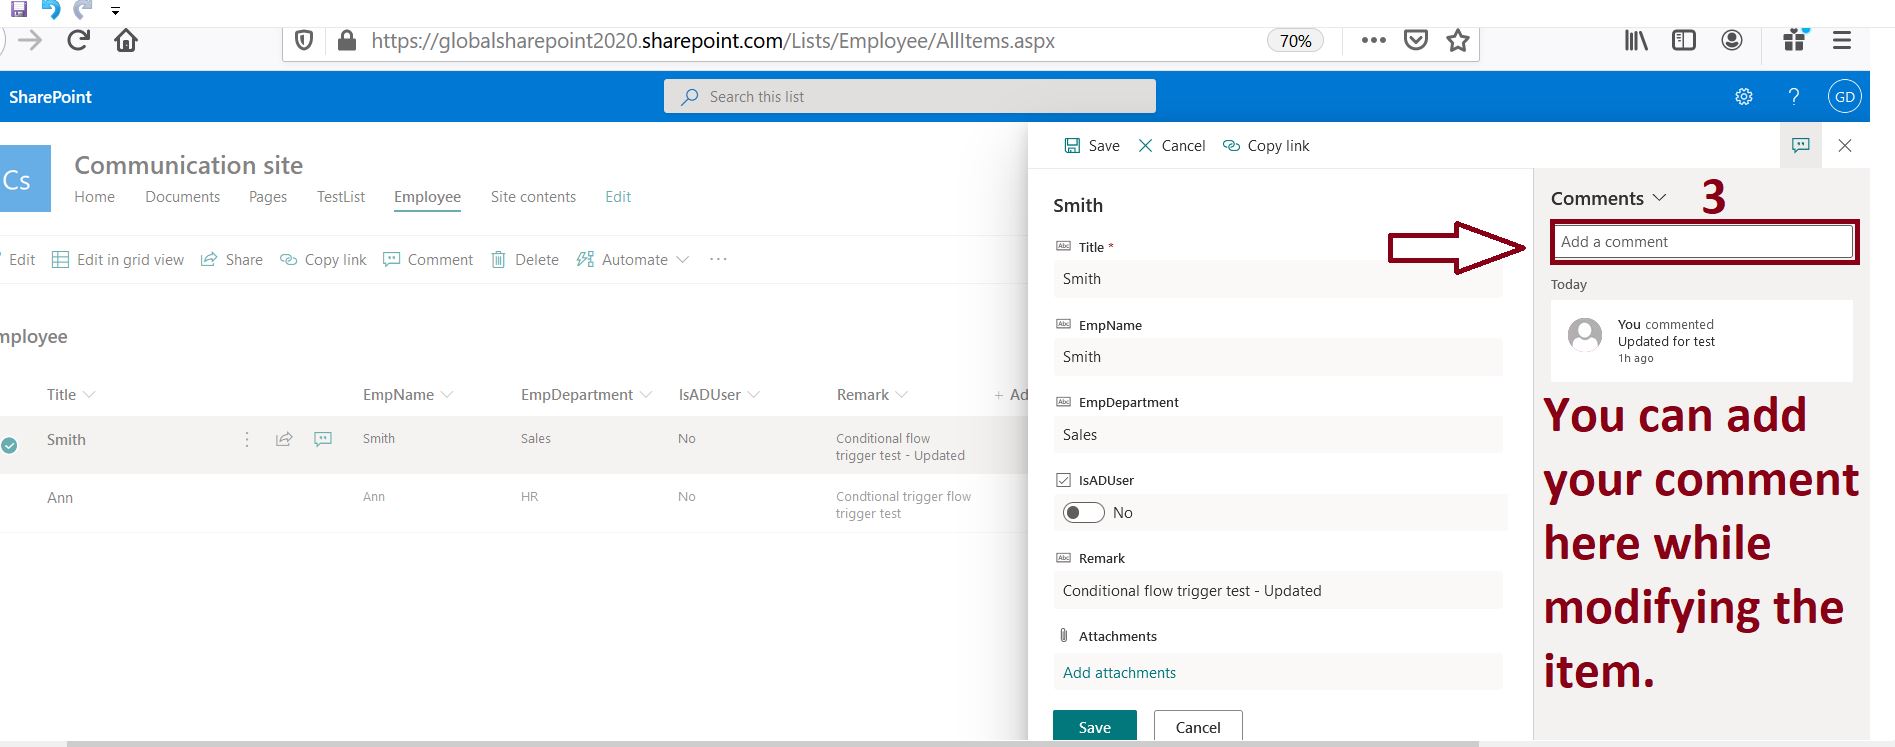 Add a comment for SharePoint Online list item modification